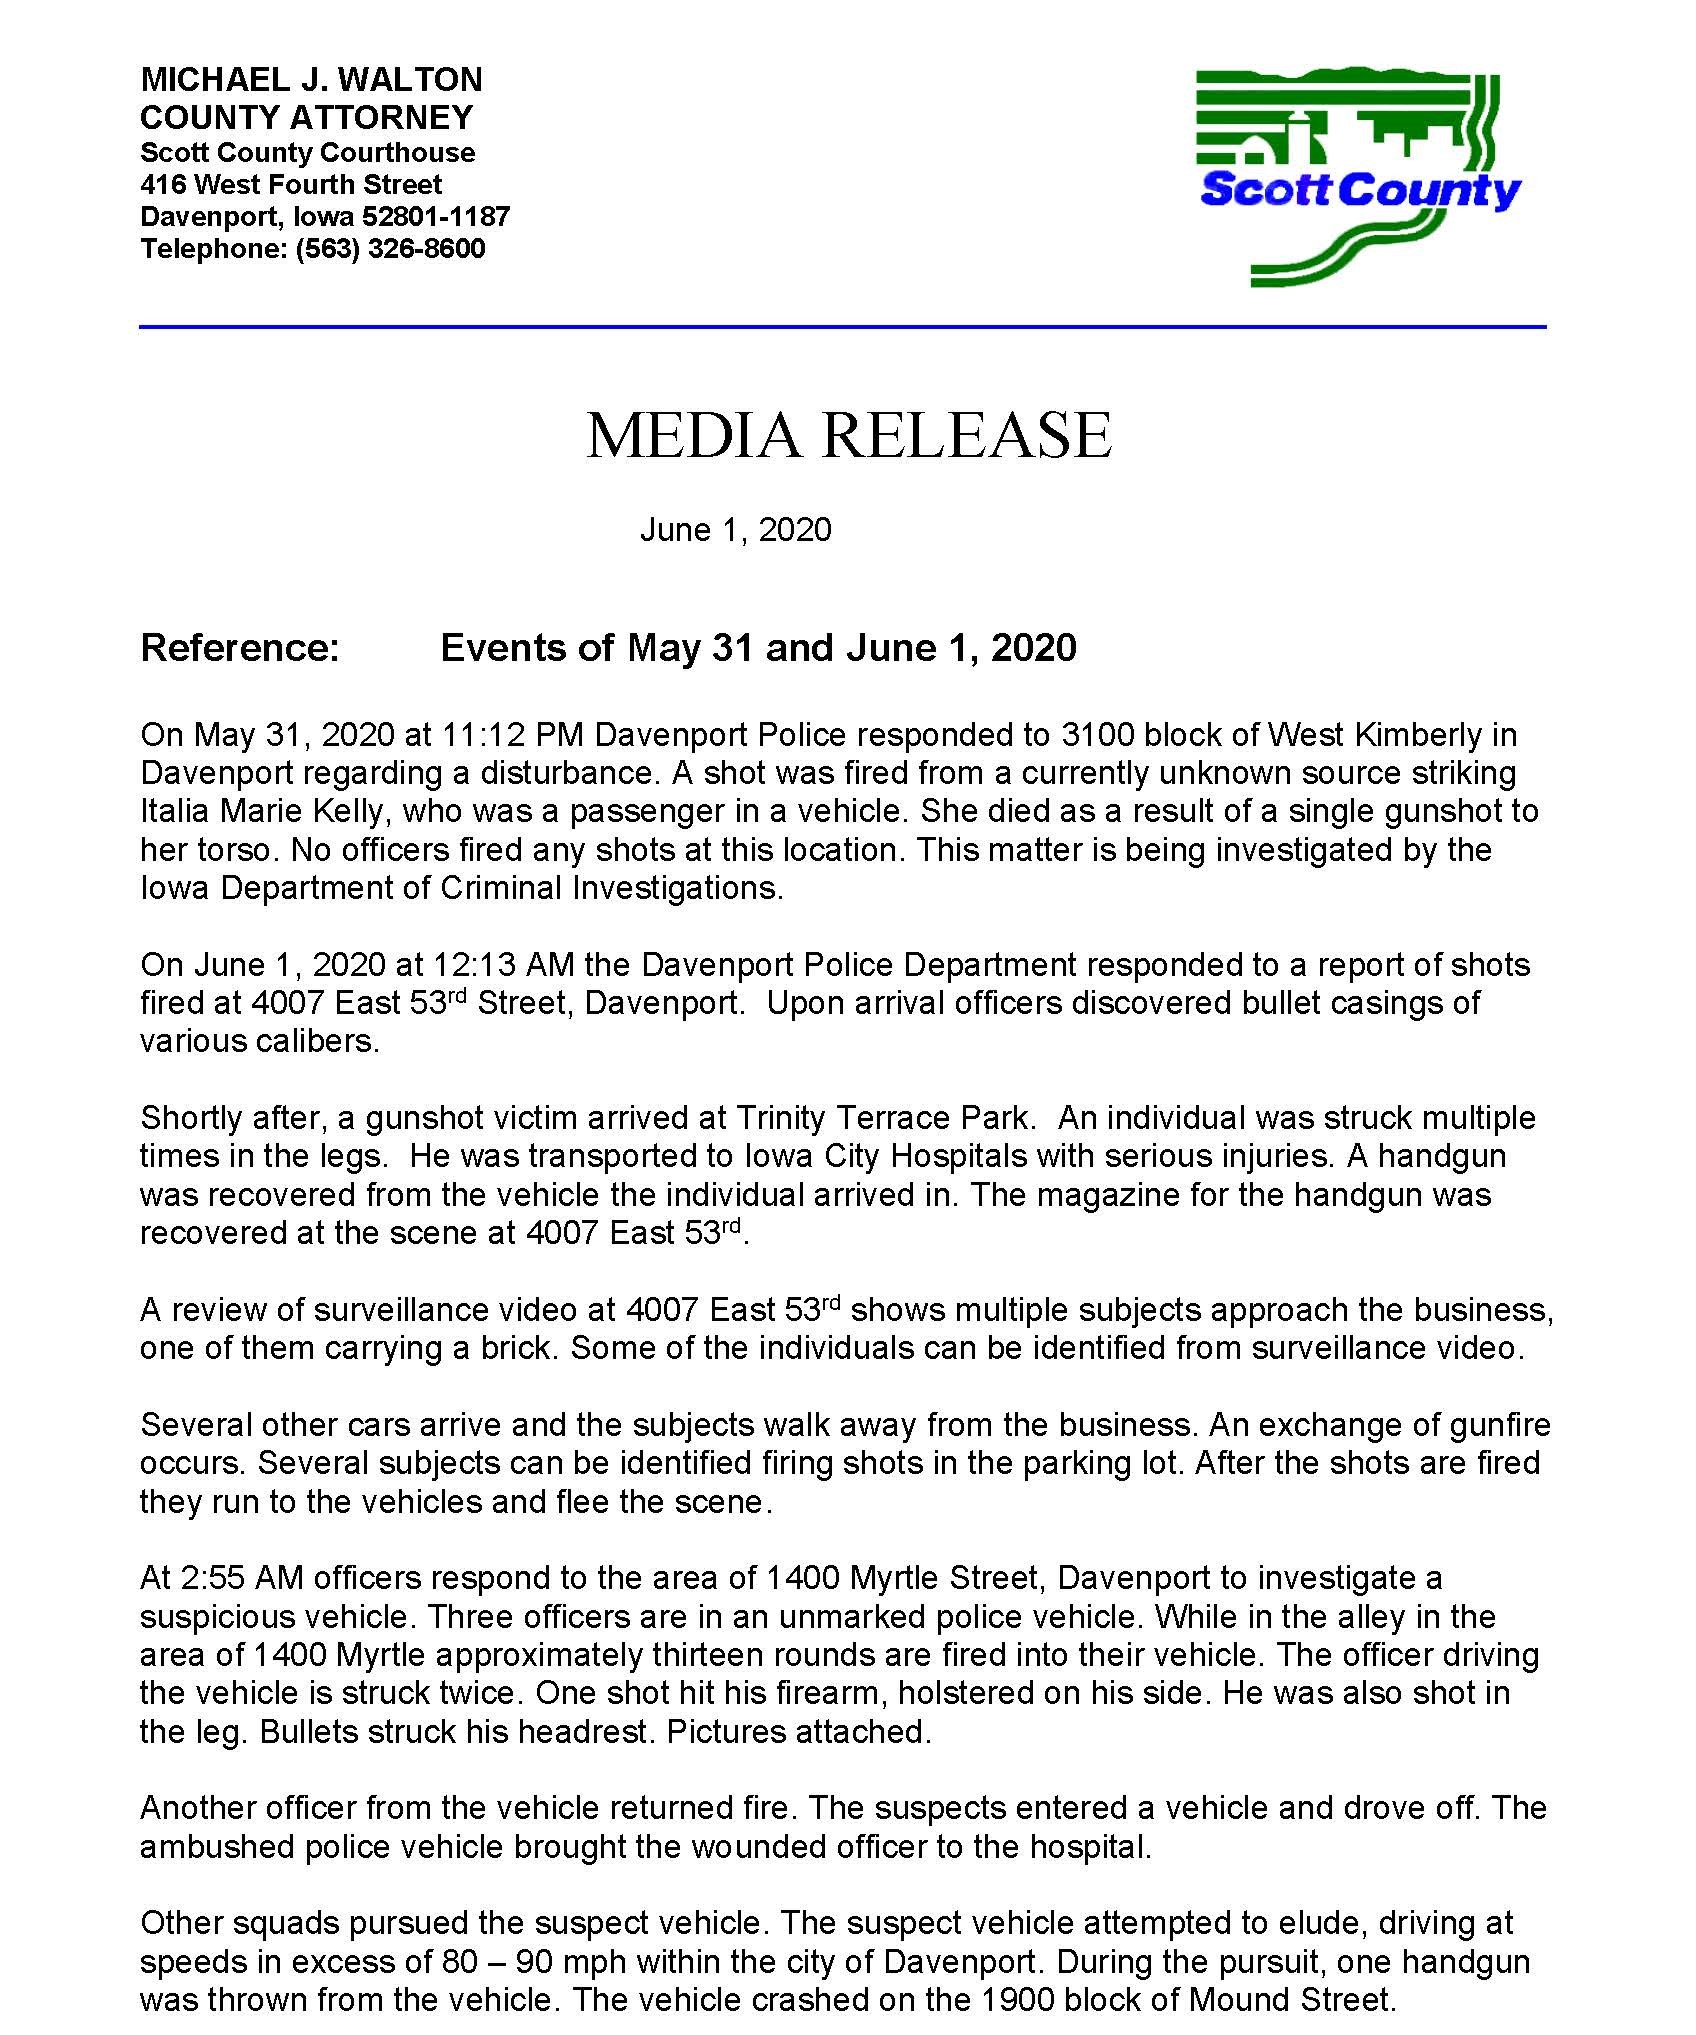 Page 1 - Link to PDF press release from the Scott County Attorney's Office. 